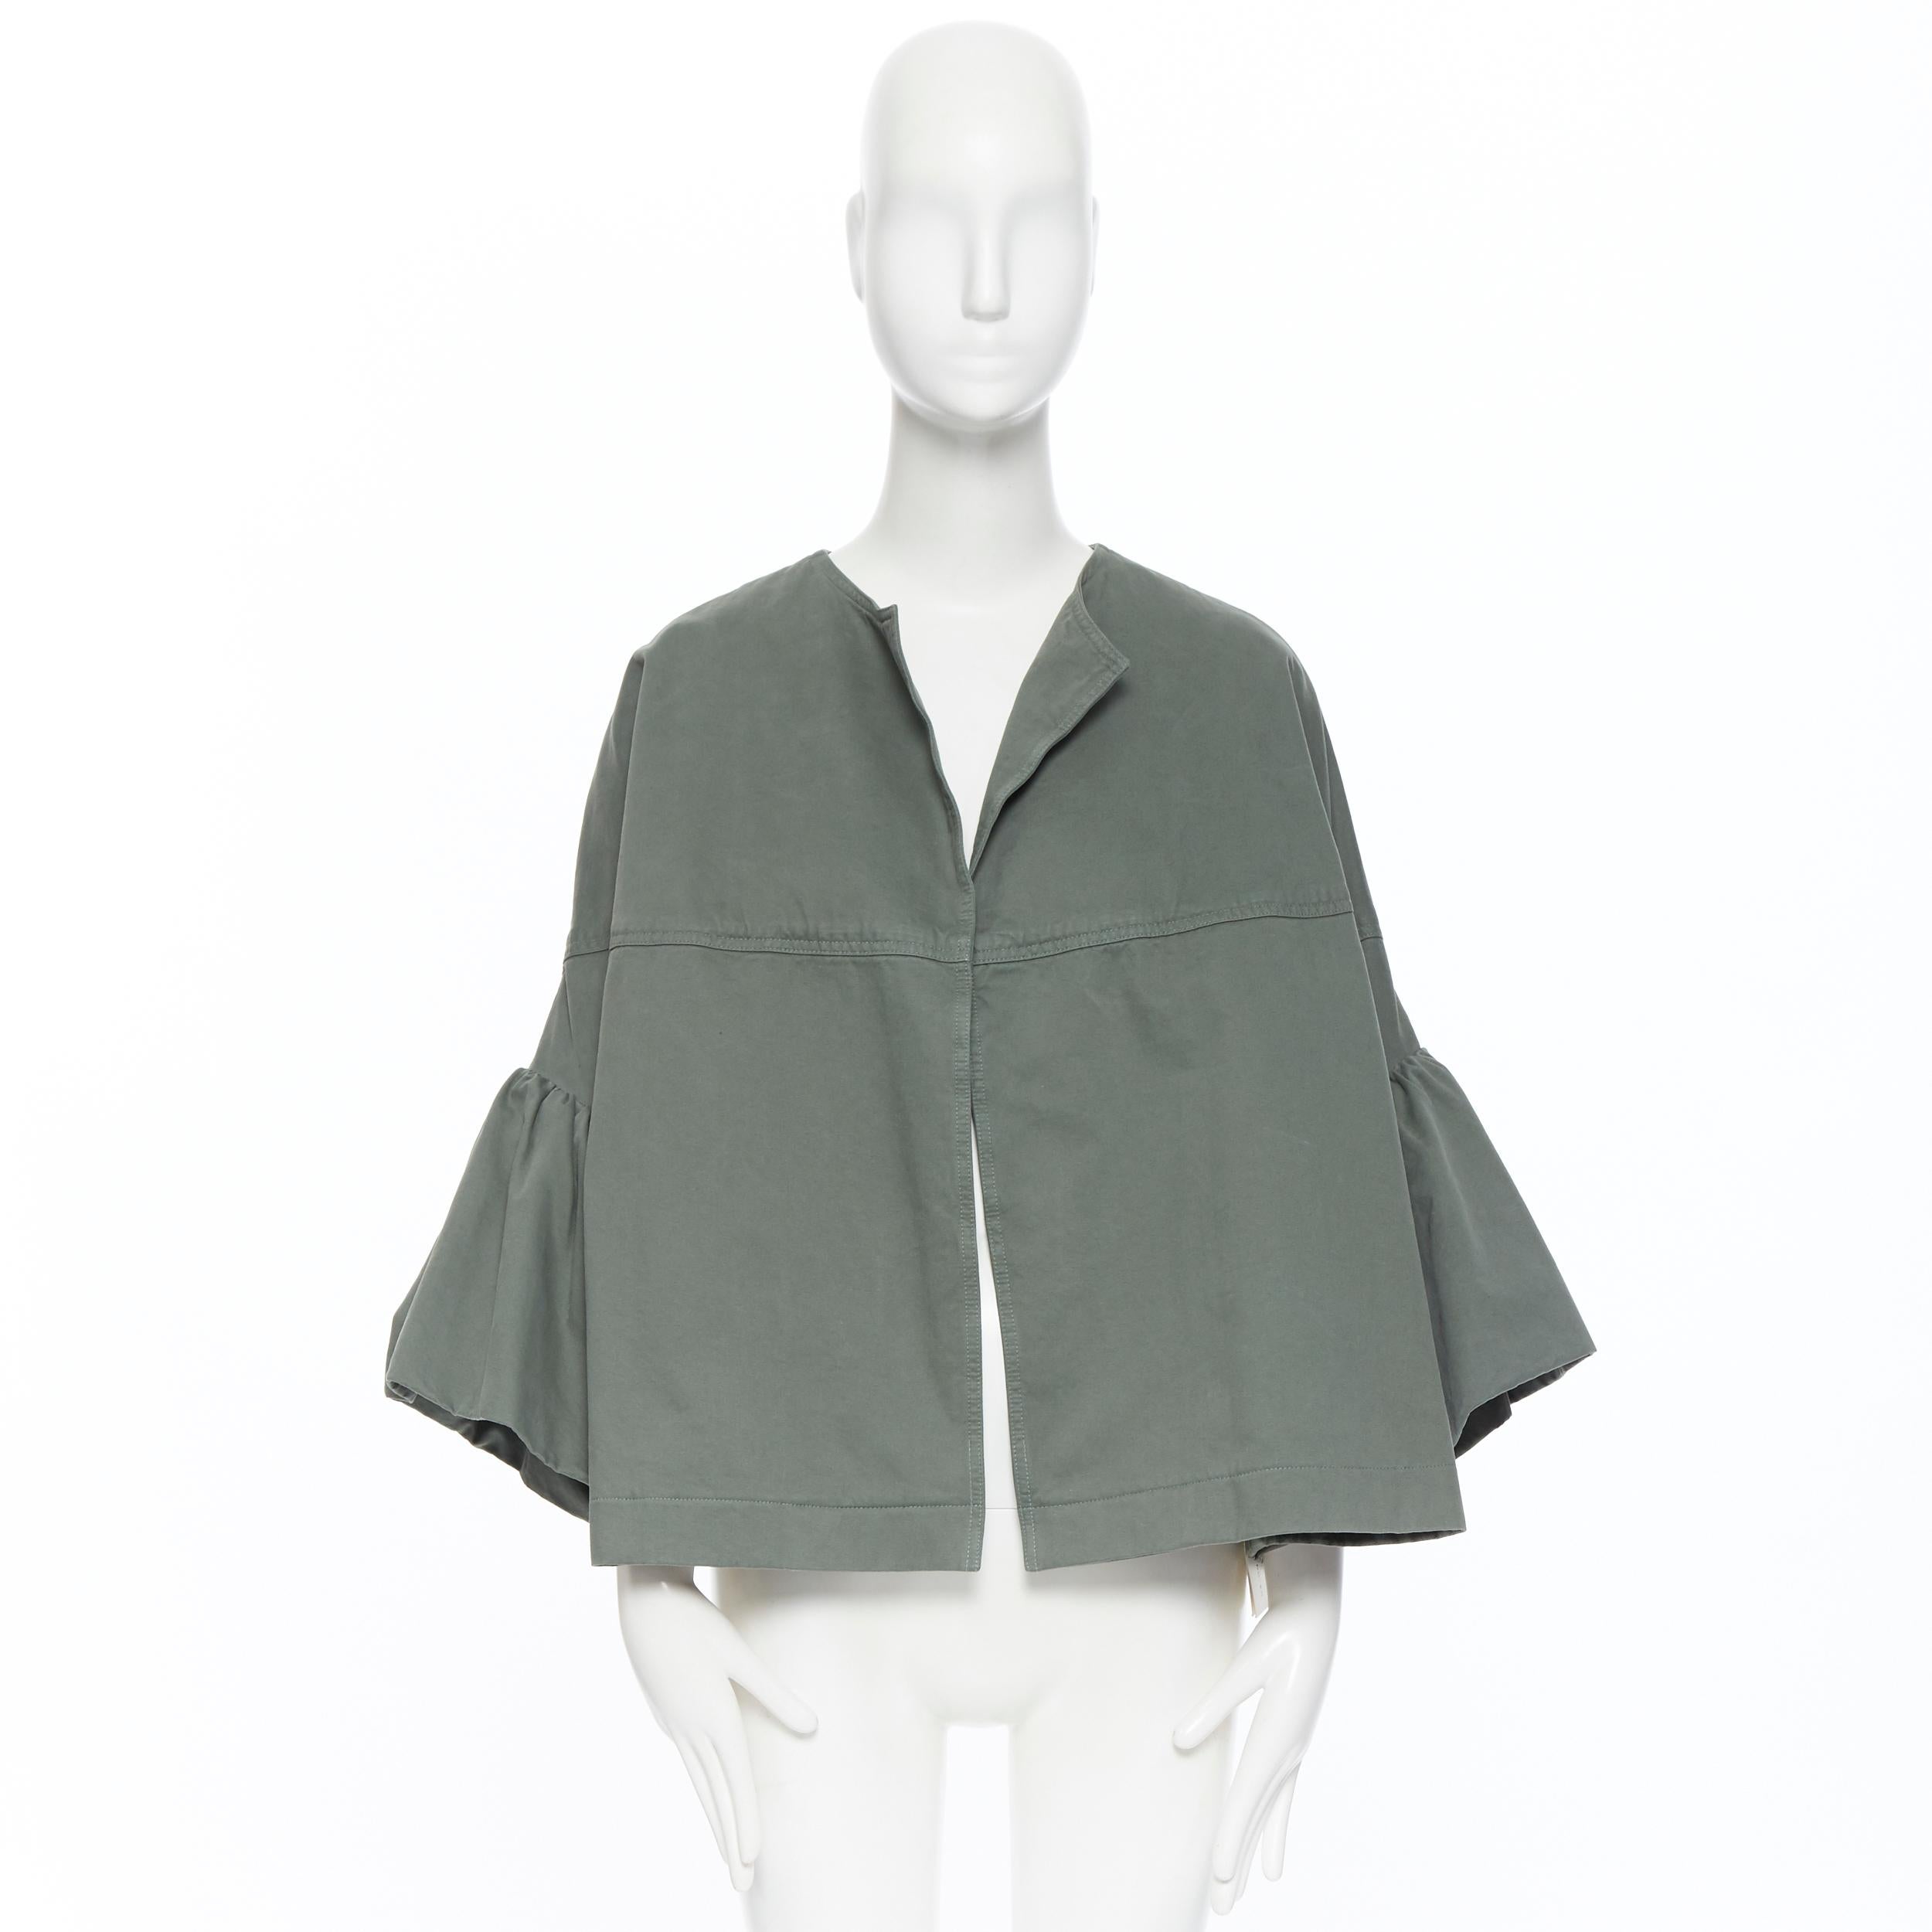 new DRIES VAN NOTEN Vera khaki green washed cotton bell sleeve swing jacket M
Brand: Dries Van Noten
Model Name / Style: Bell sleeve jacket
Material: Cotton
Color: Green
Pattern: Solid
Extra Detail: Open front 3/4 sleeve.
Made in: